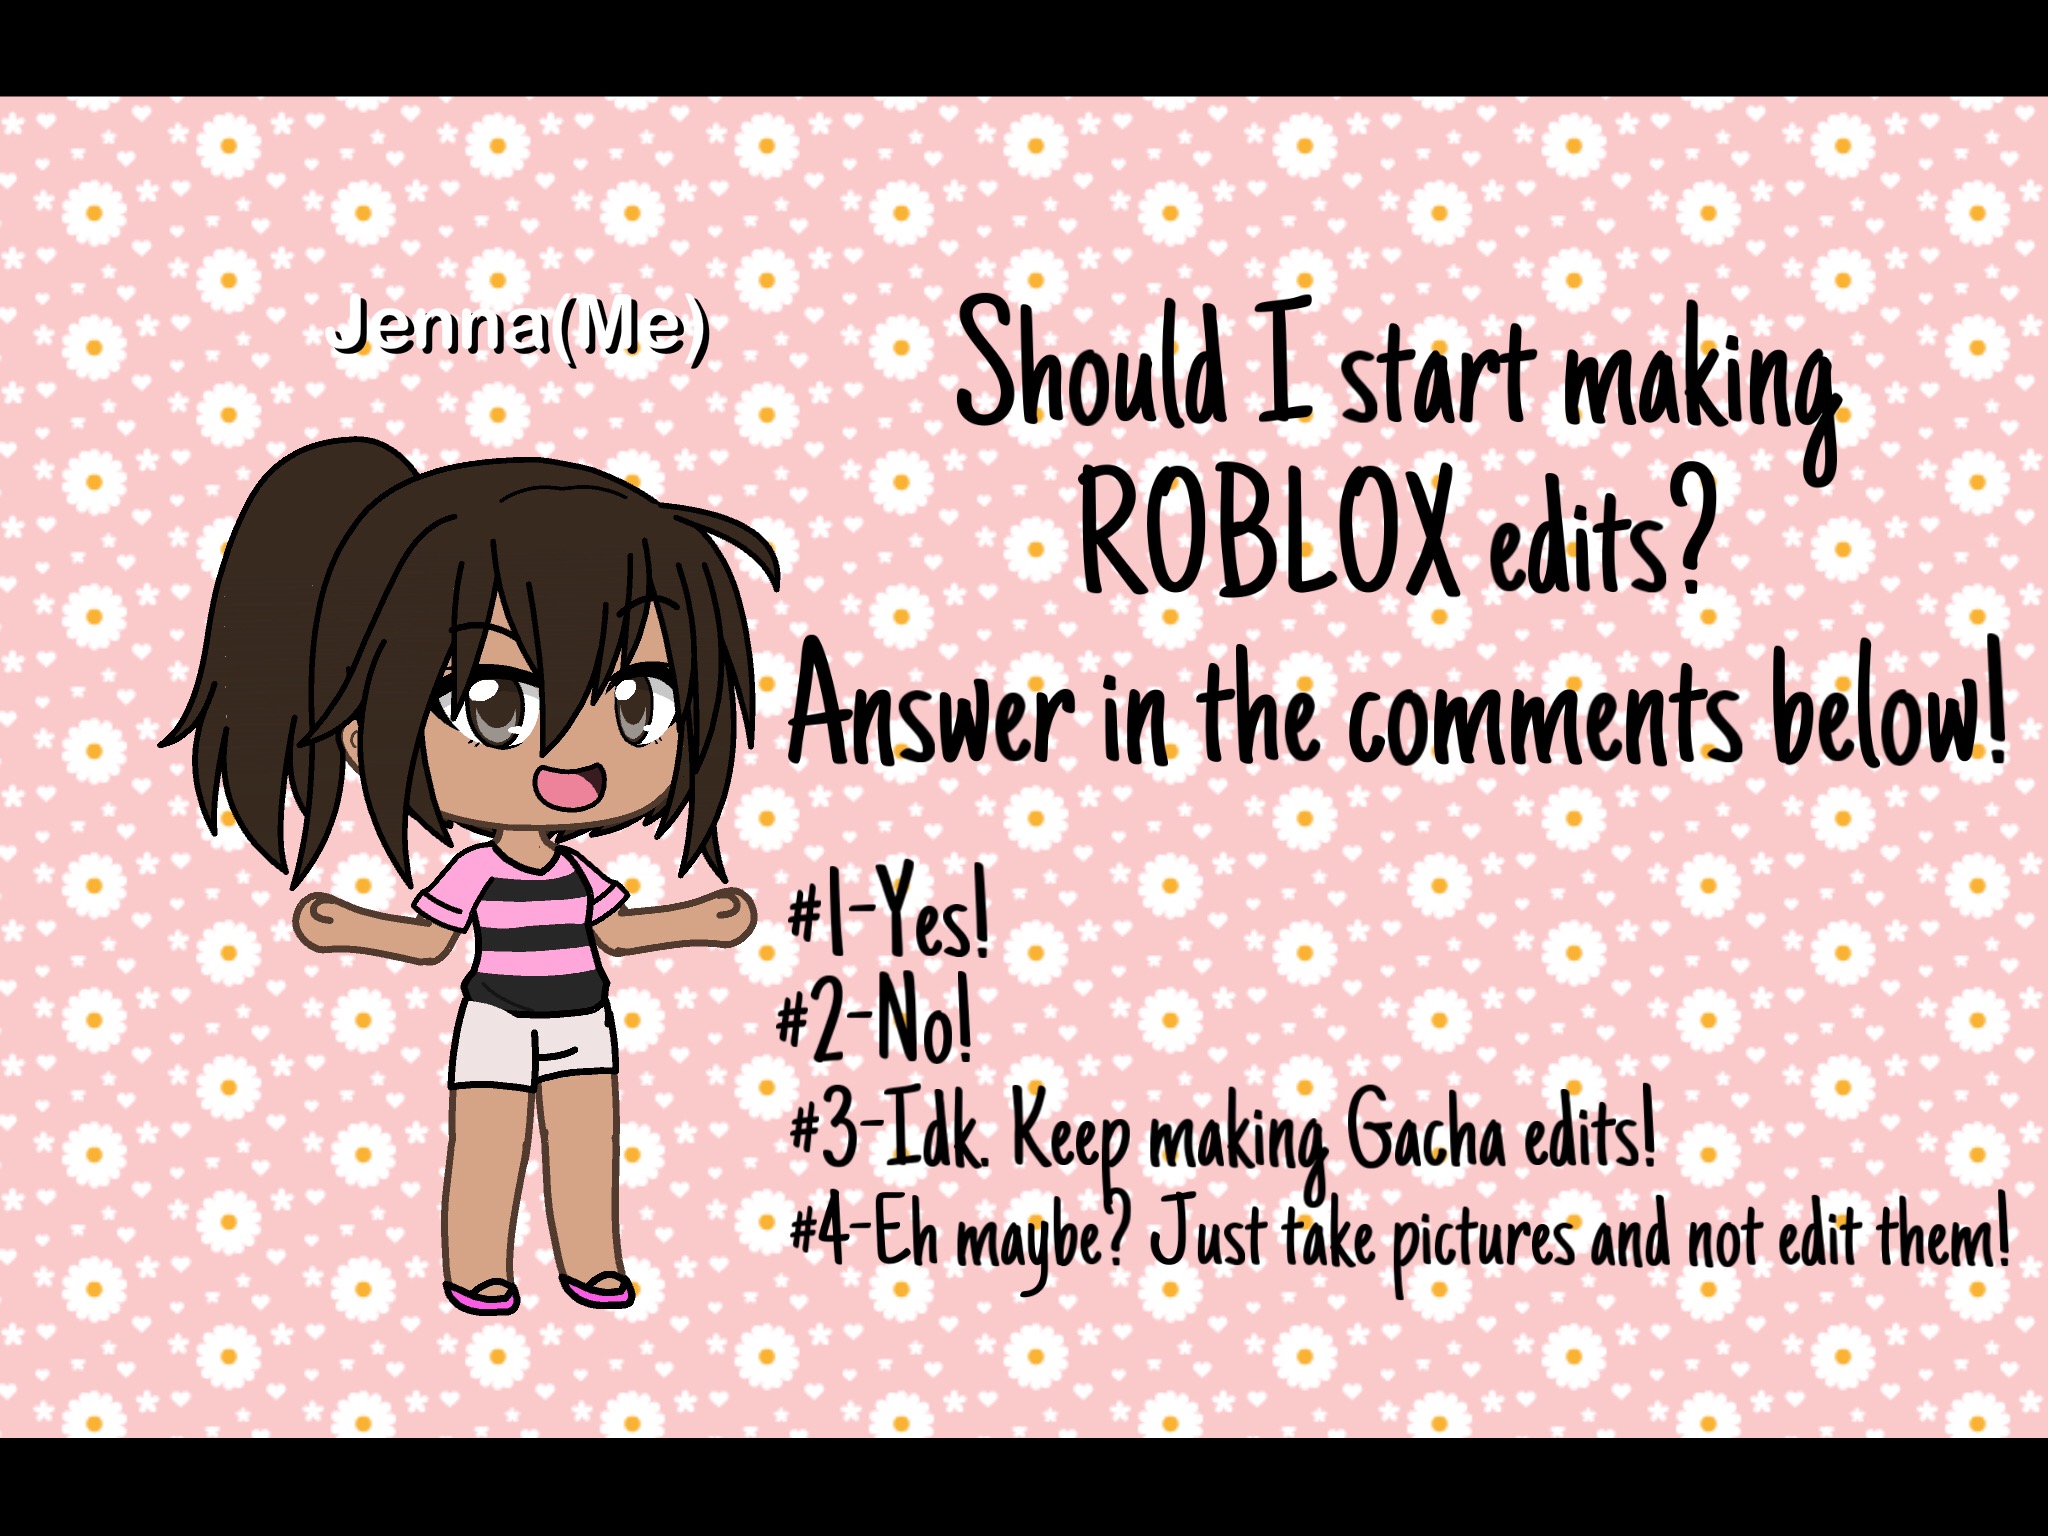 Gachalife Robloxedits Roblox Image By Dead Account - gachalife robloxedits roblox irl me answer comments